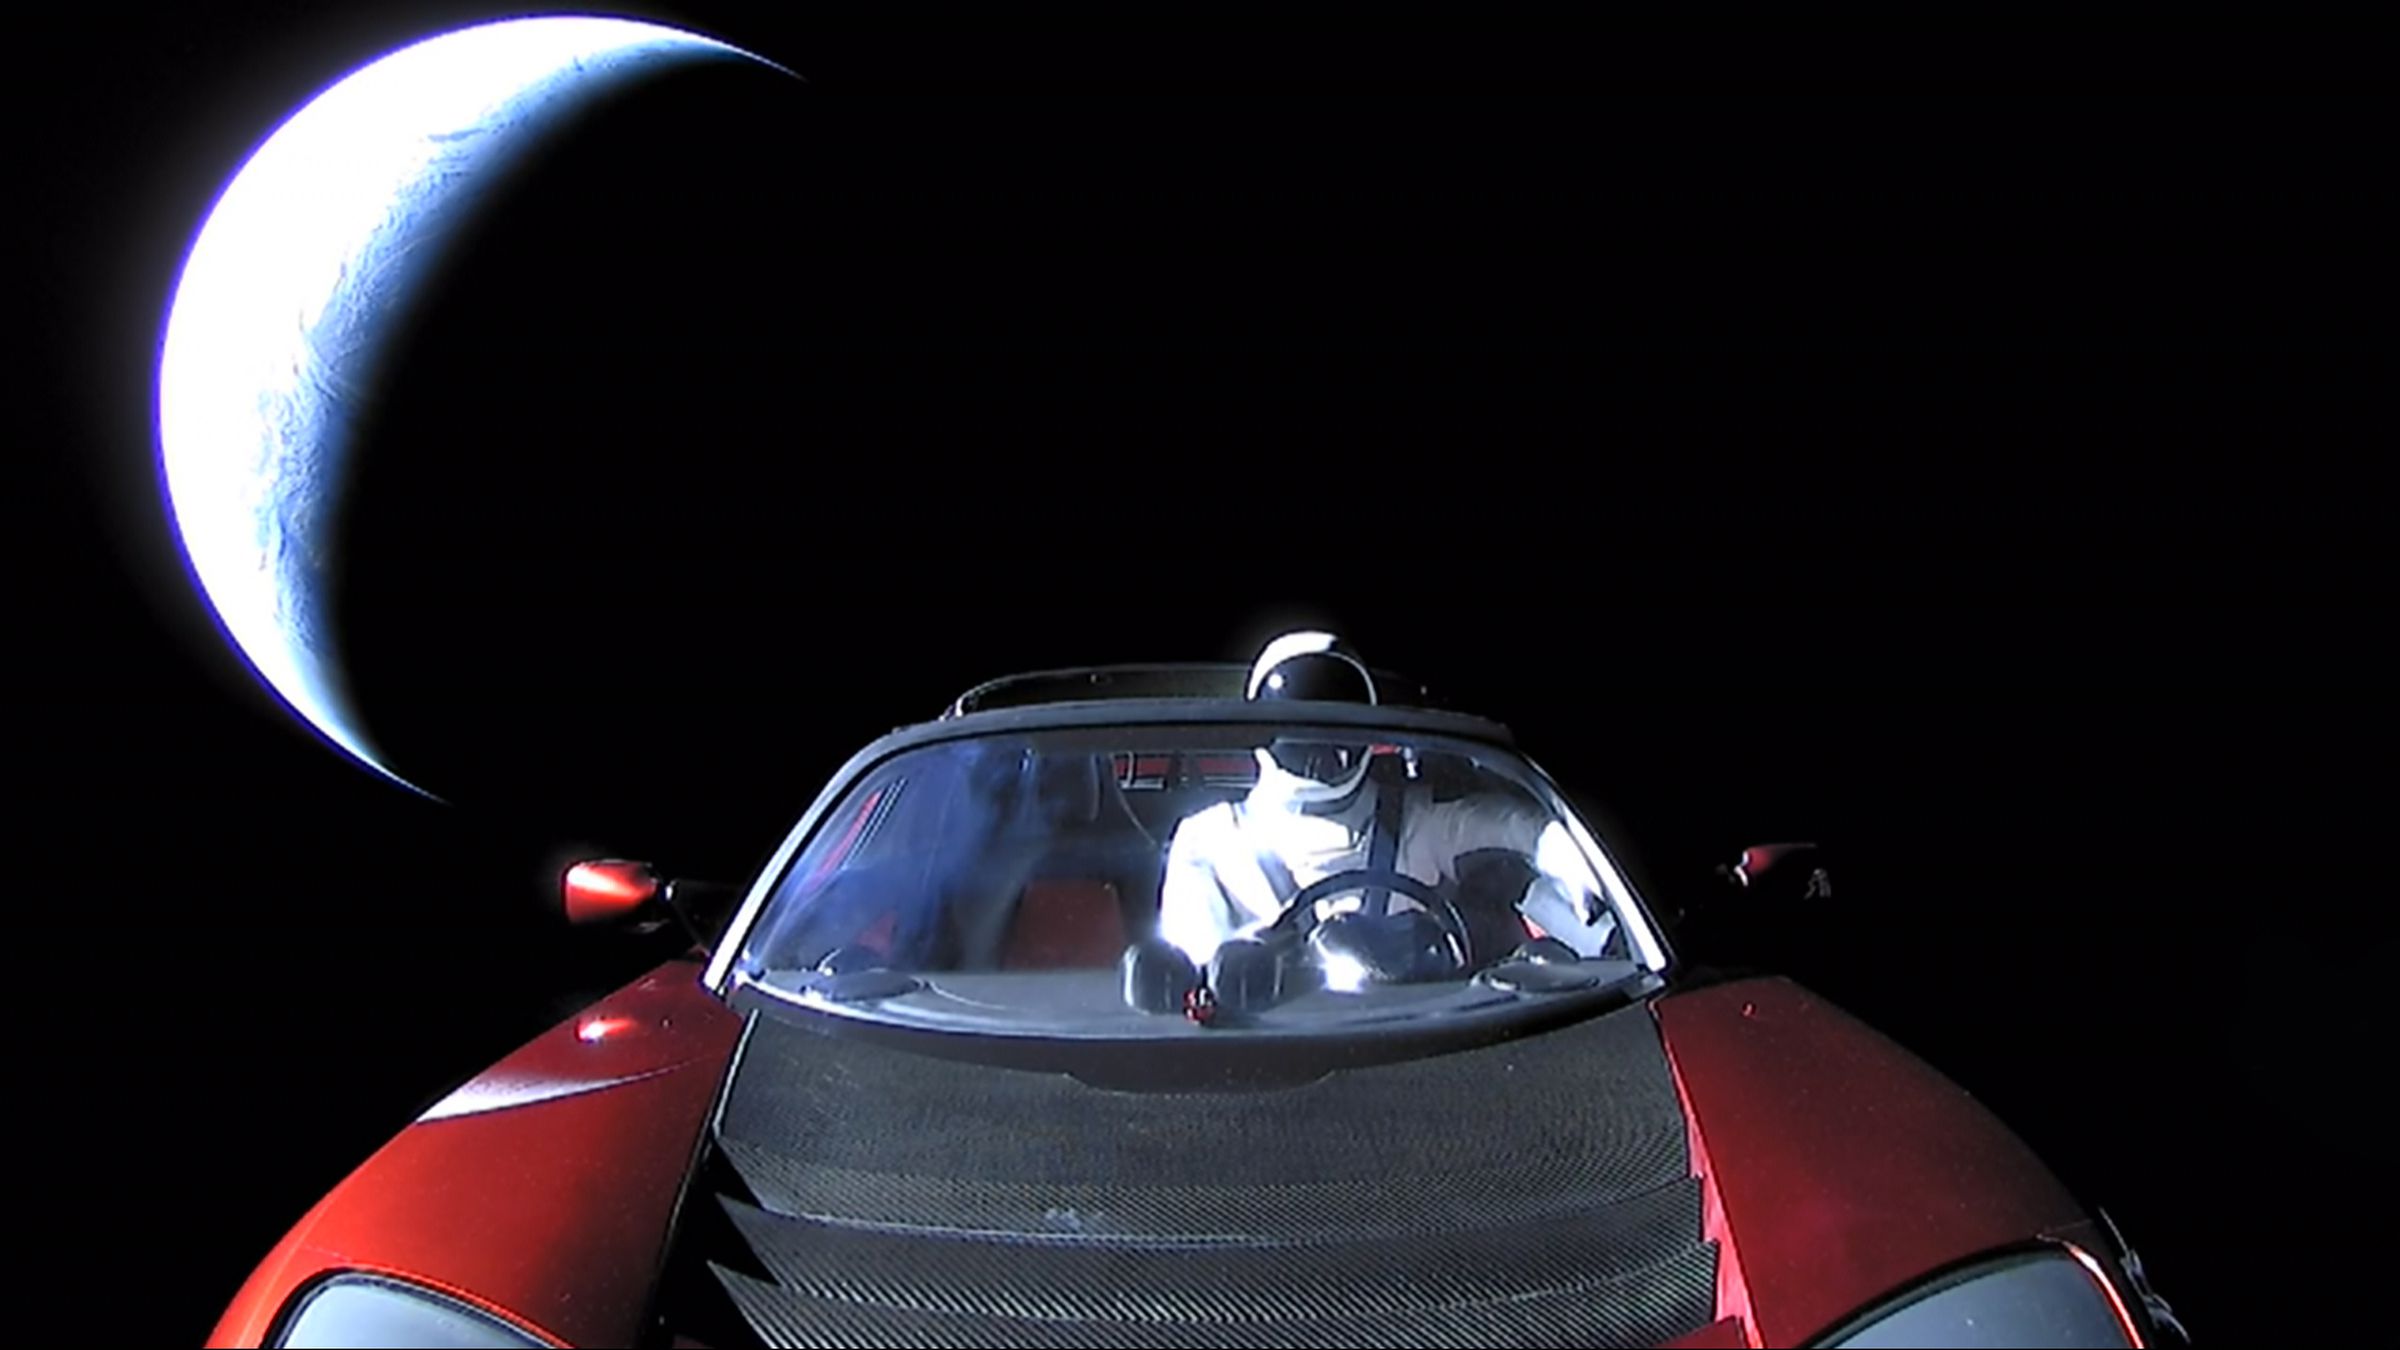 The Tesla roadster, launched on top of SpaceX’s Falcon Heavy, in space